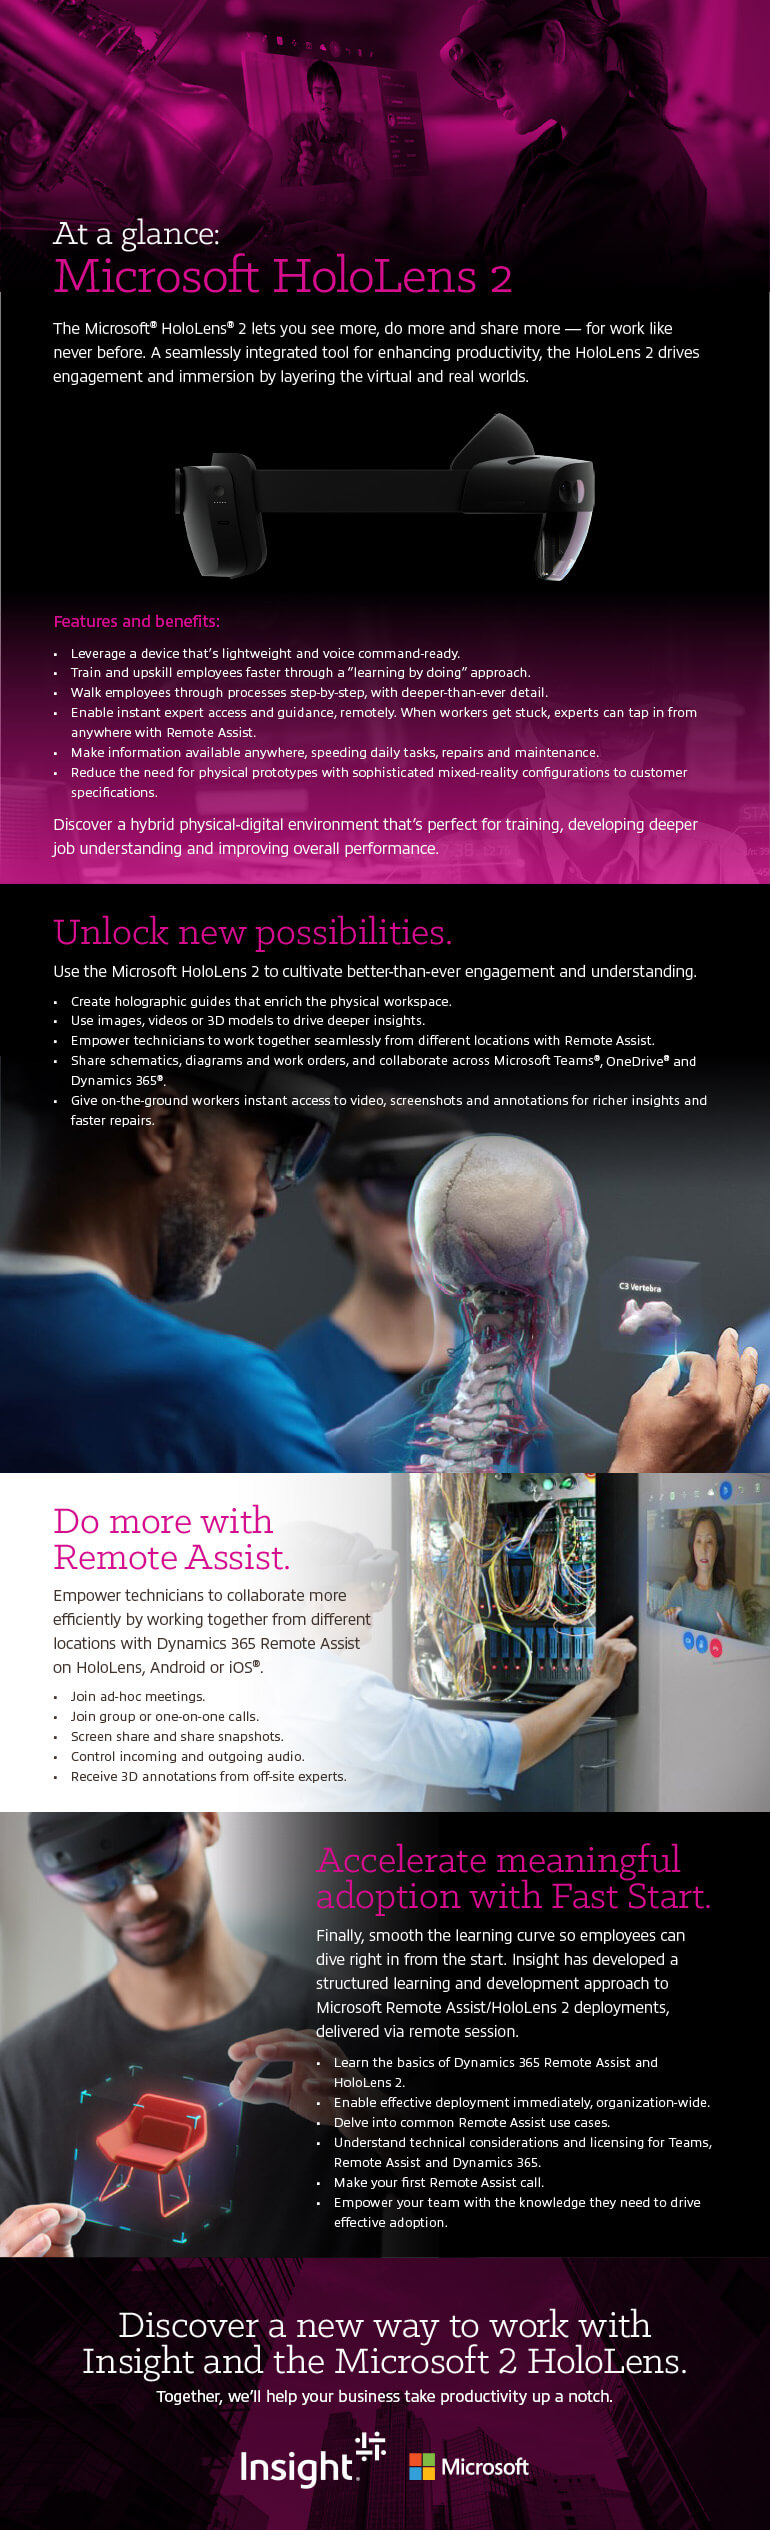 A World of New Possibilities With the Microsoft HoloLens 2 infographic as transcribed below